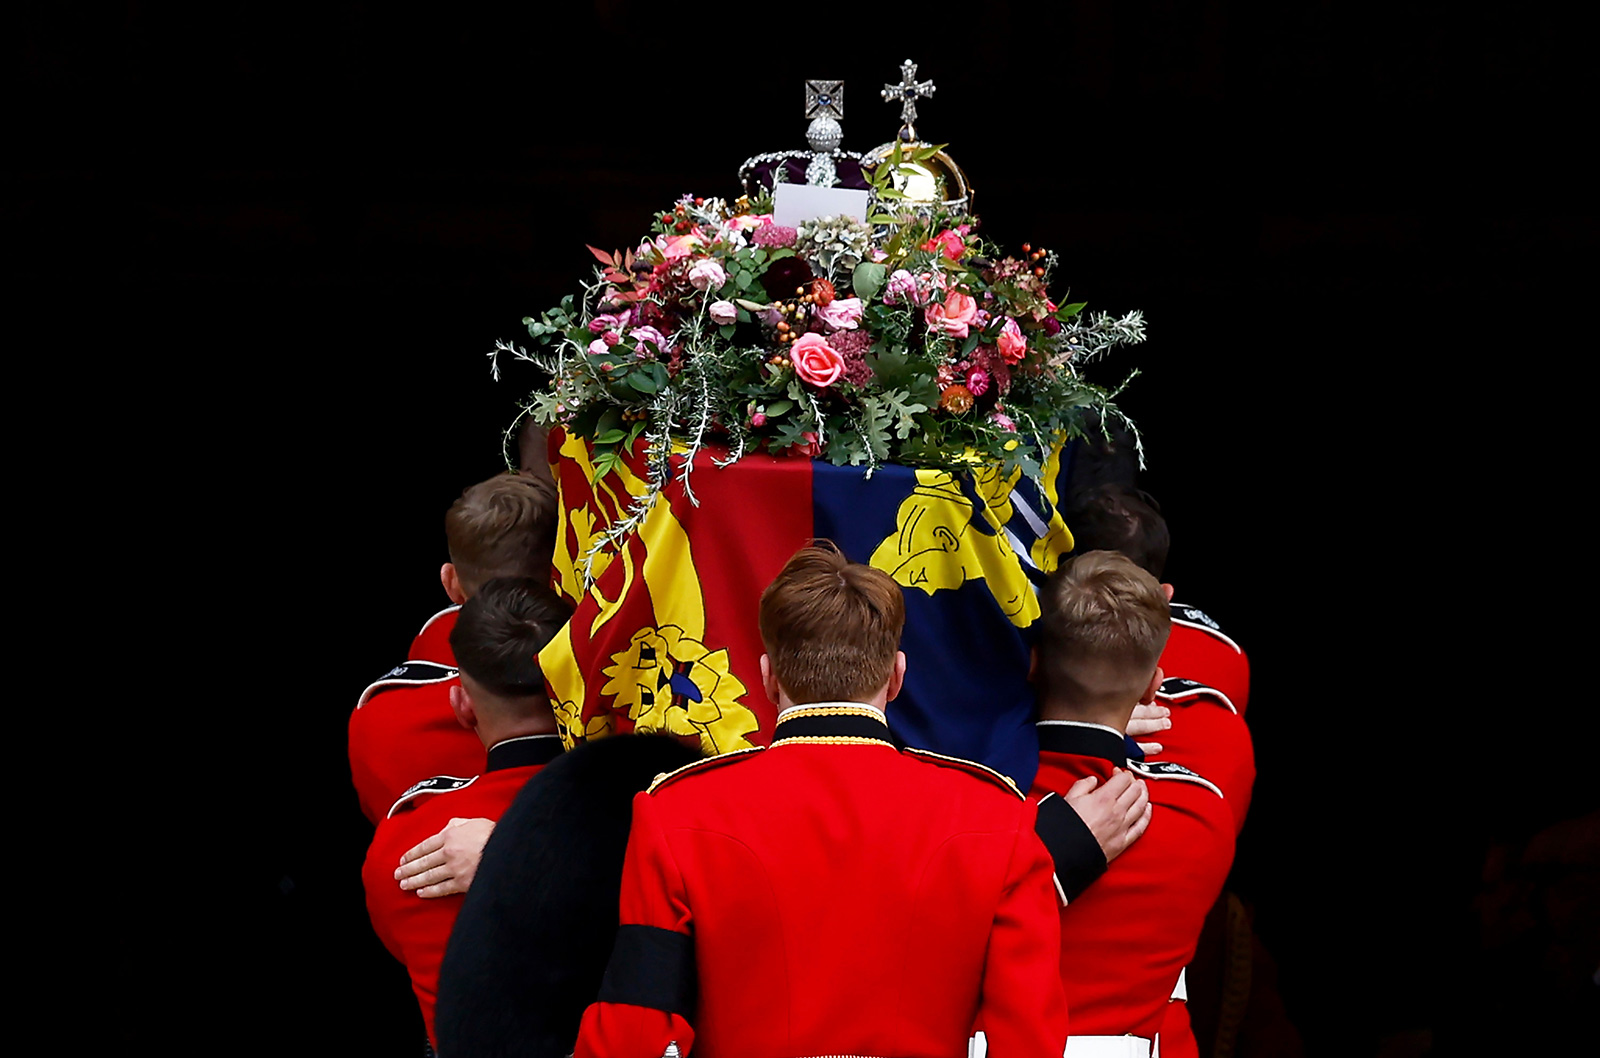 Photos that defined 2022: Queen's funeral